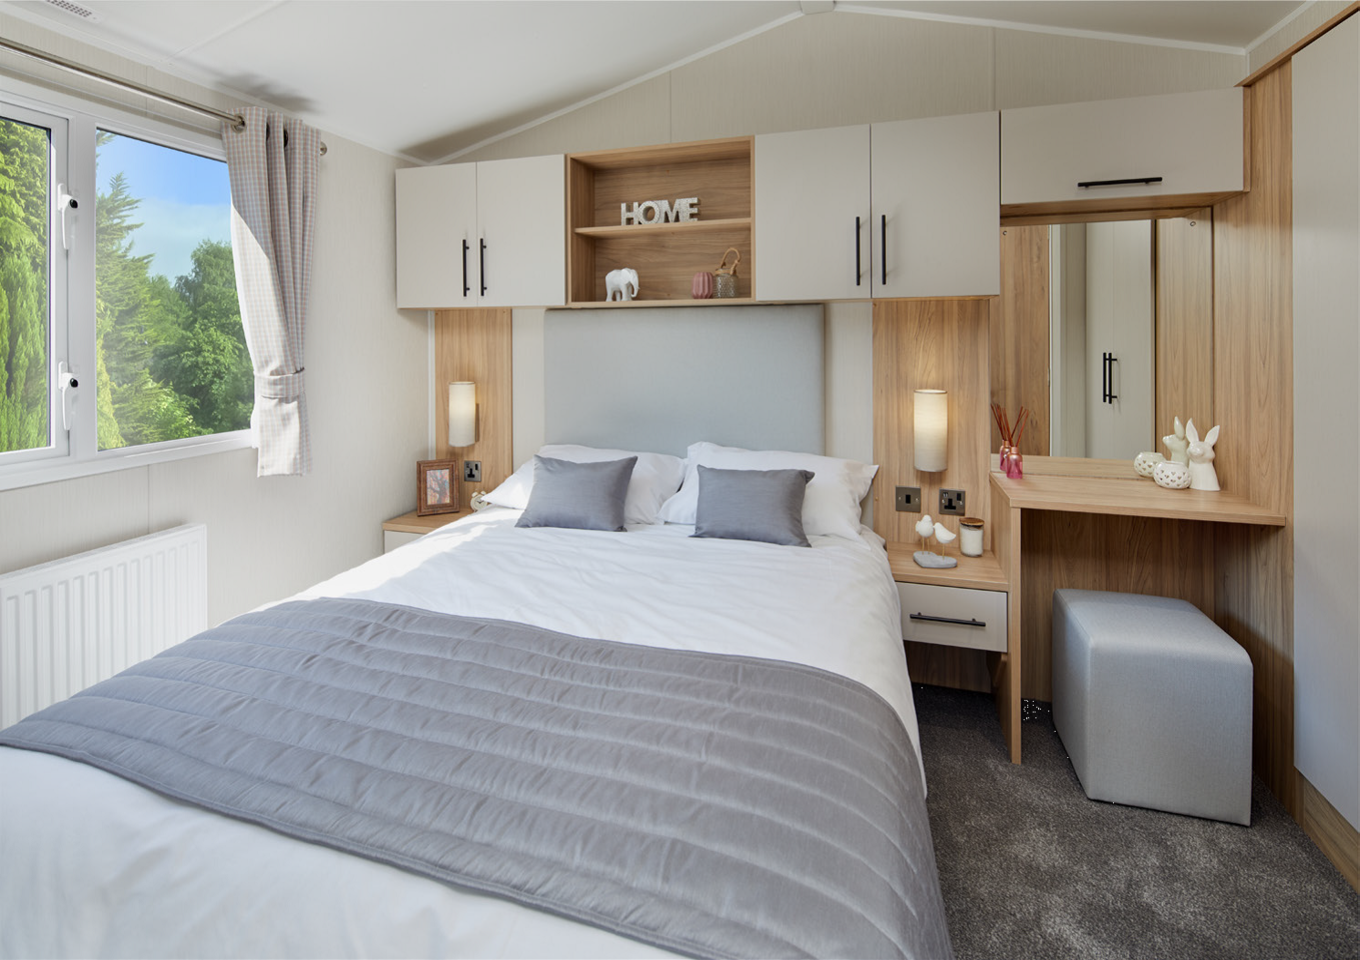 Holiday Home For Sale At Stratford Parks - Willerby Manor - Master Bedroom